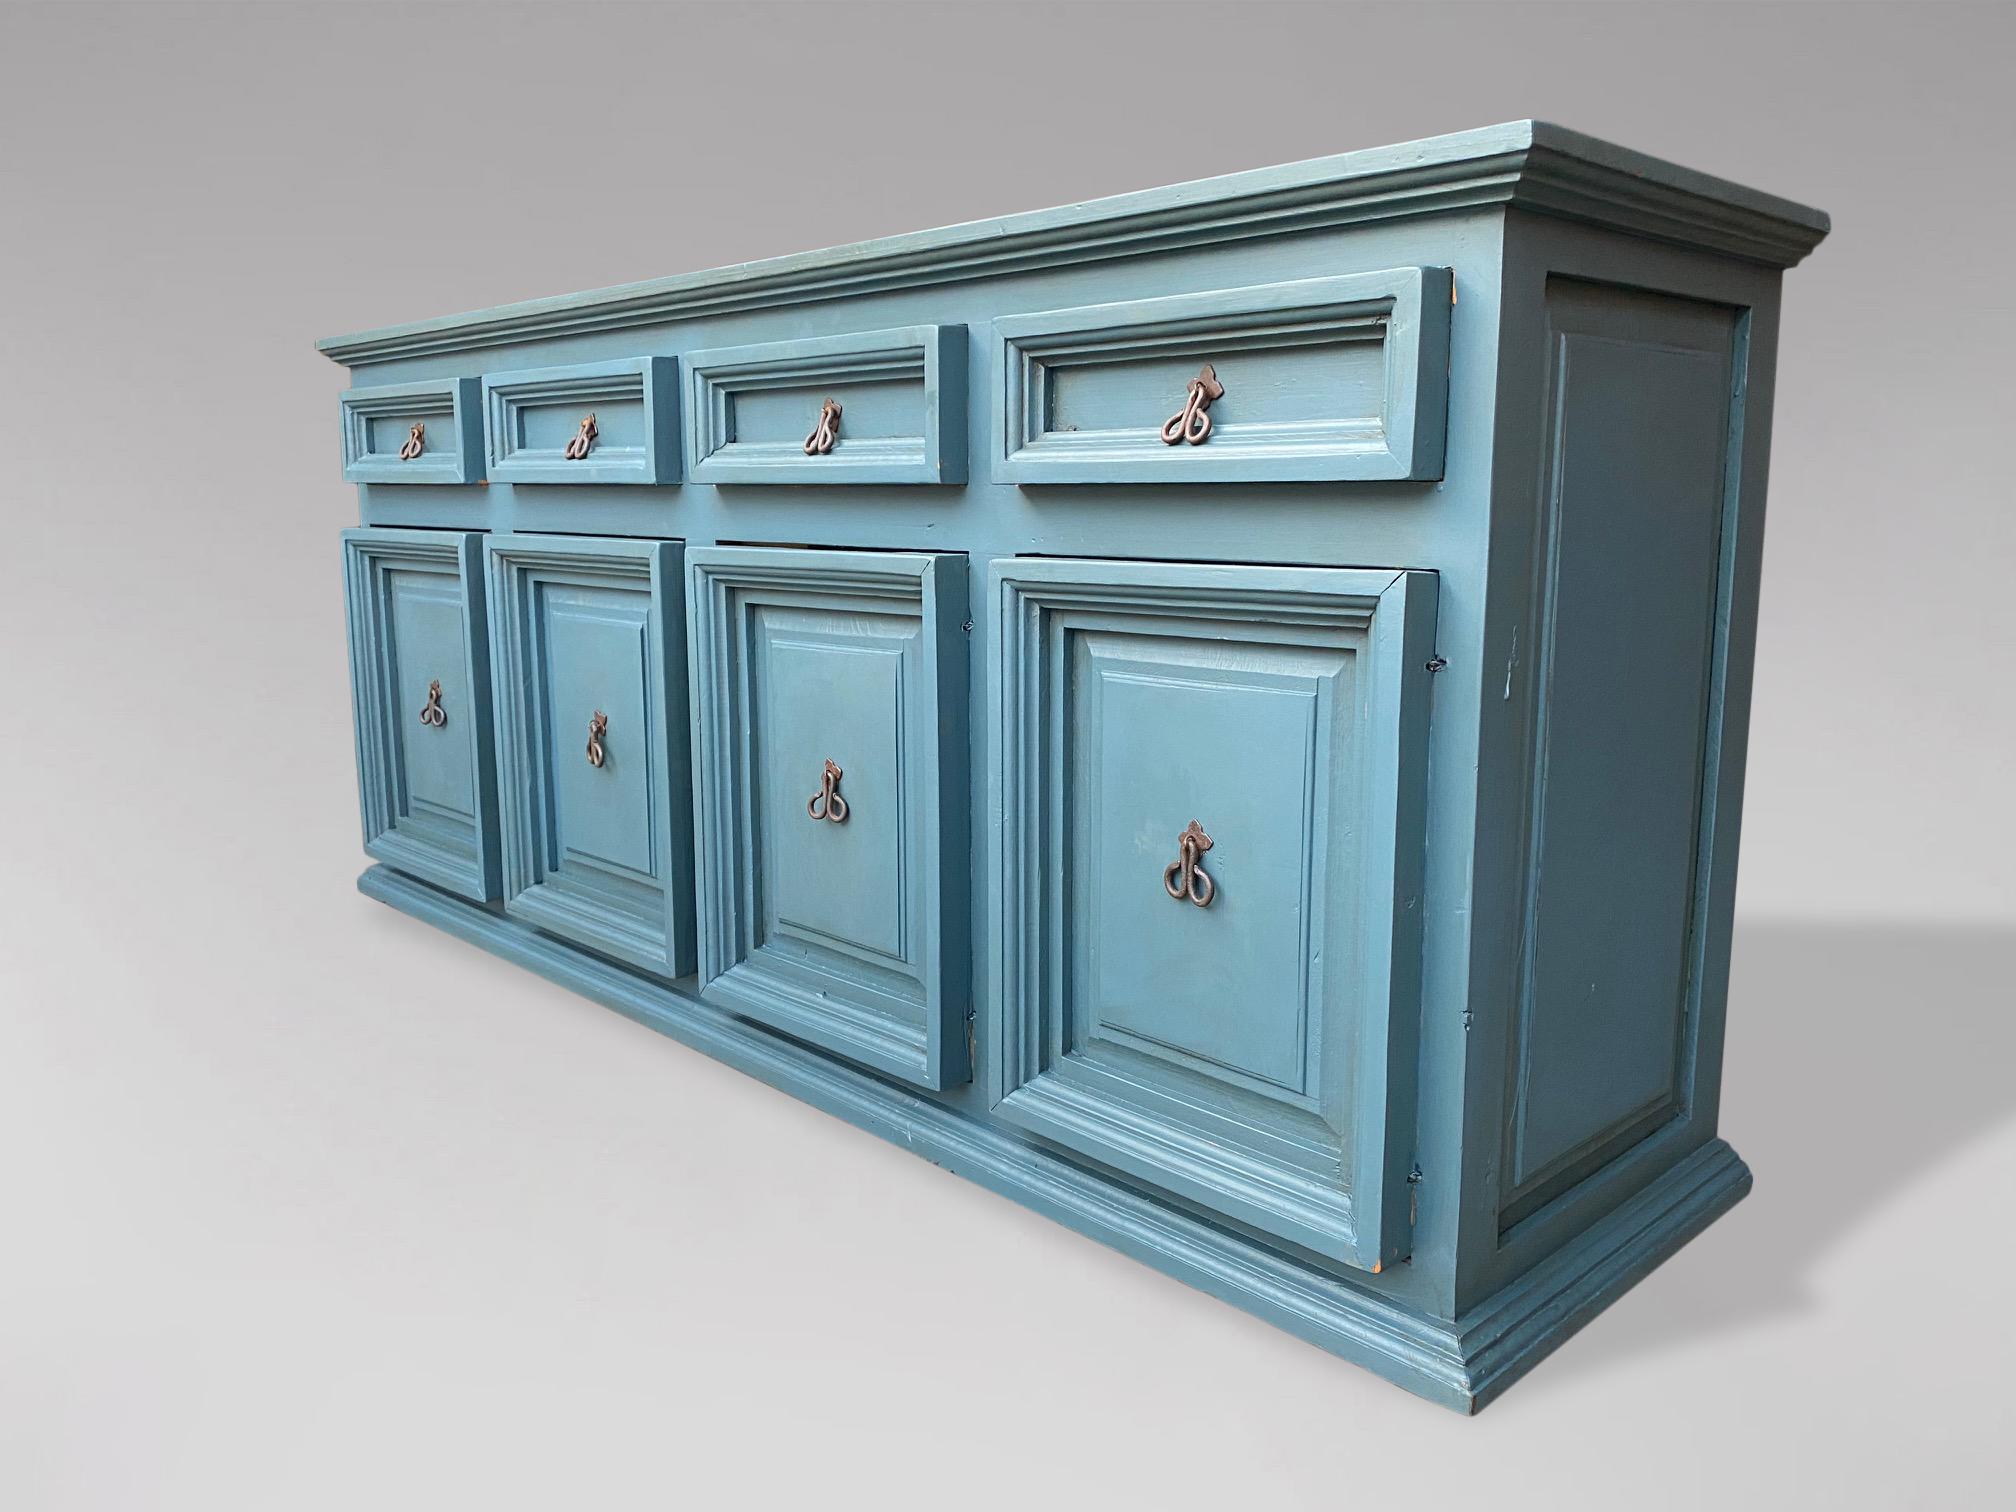 20th Century Blue Painted Pine Dresser Base or Enfilade In Good Condition For Sale In Petworth,West Sussex, GB